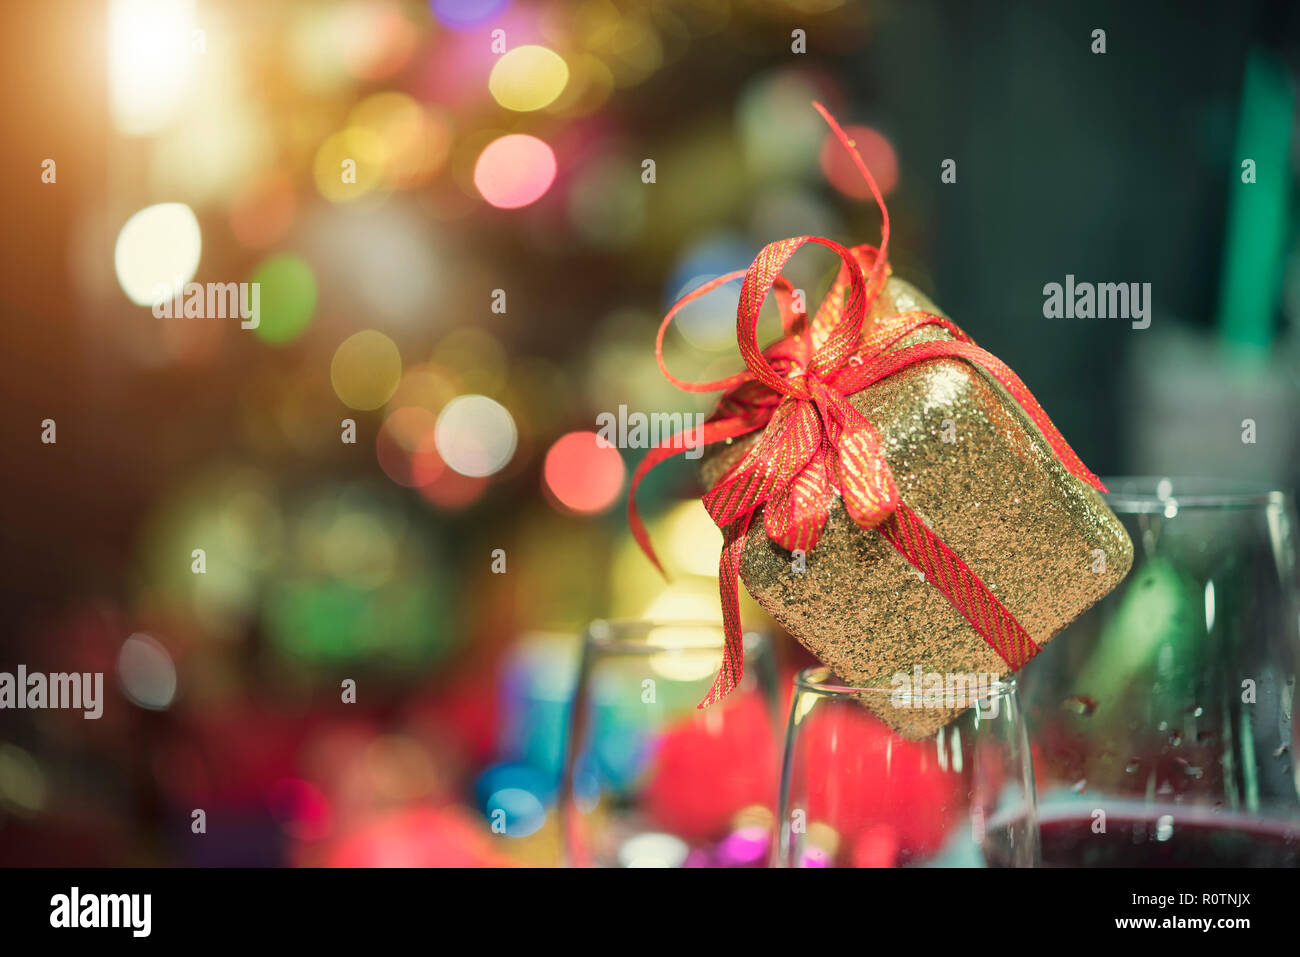 Christmas gift box or present with red bow ribbon on light bokeh blurred background. Copy space for greeting text. Cerebrate party concept. Stock Photo